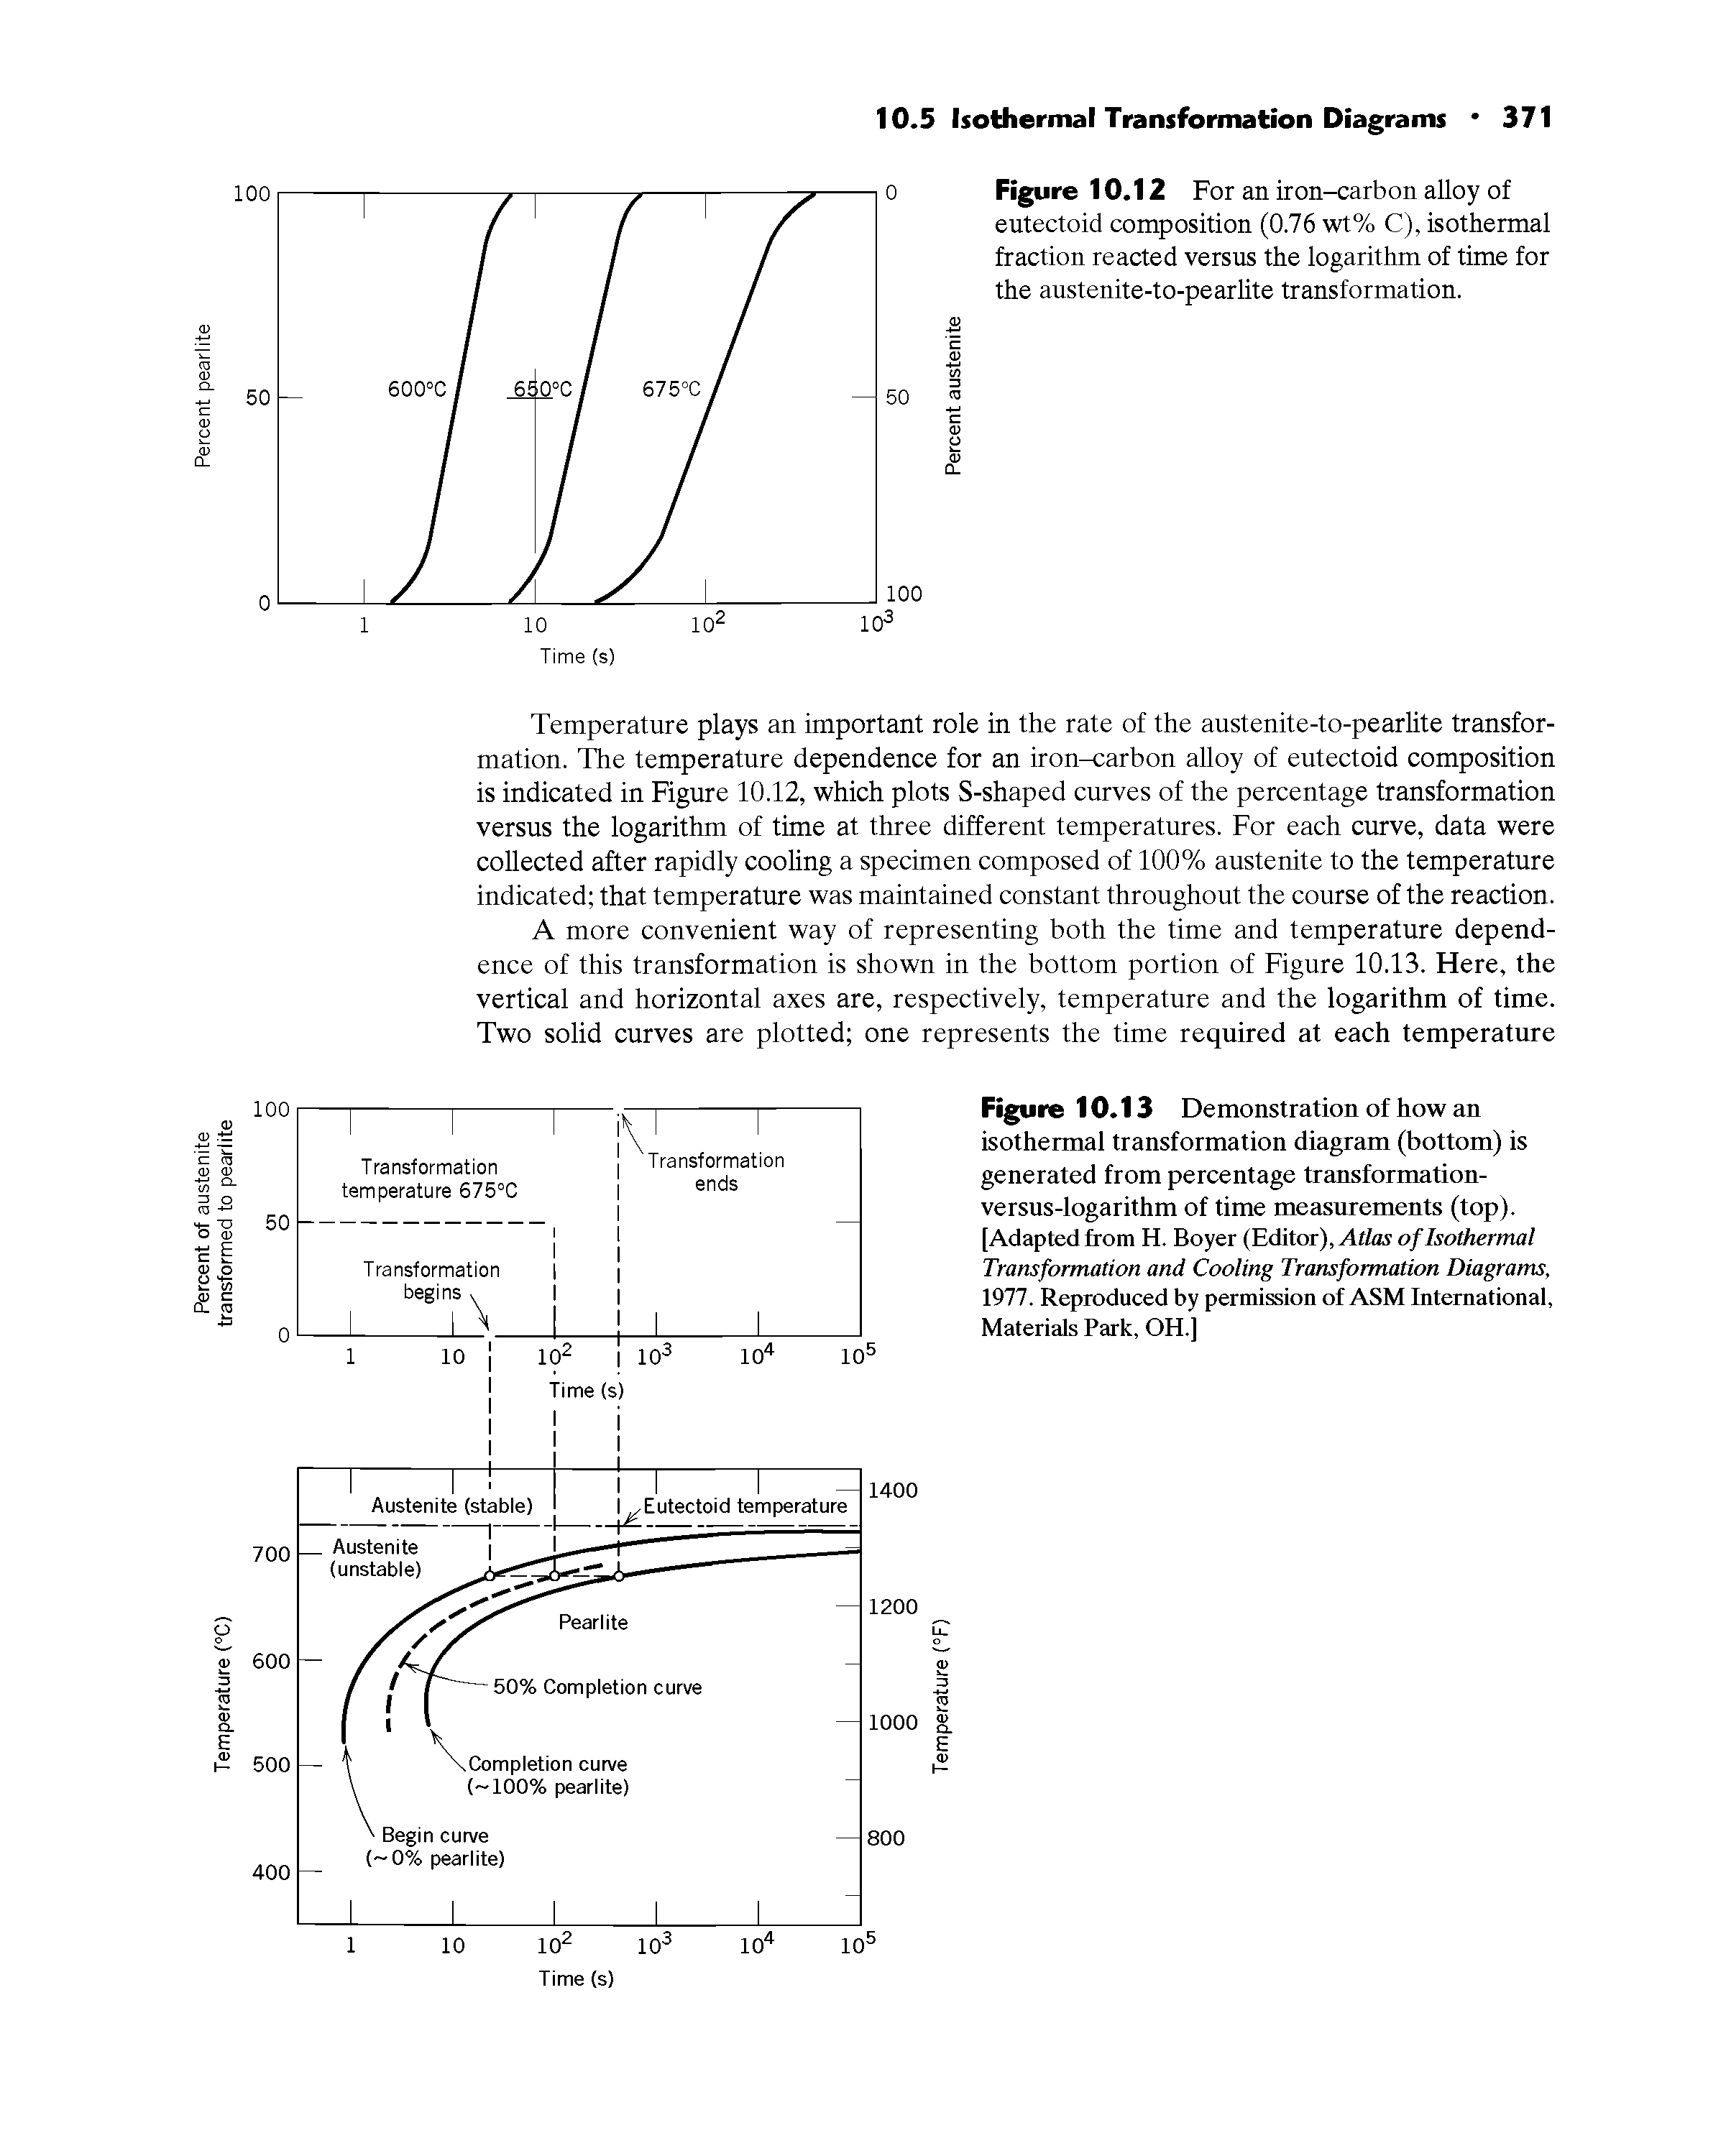 Figure 10.13 Demonstration of how an isothermal transformation diagram (bottom) is generated from percentage transformation-versus-logarithm of time measurements (top). [Adapted from H. Boyer (Editor), Atlas of Isothermal Transformation and Cooling Transformation Diagrams, 1977. Reproduced by permission of ASM International, Materials Park, OH.)...